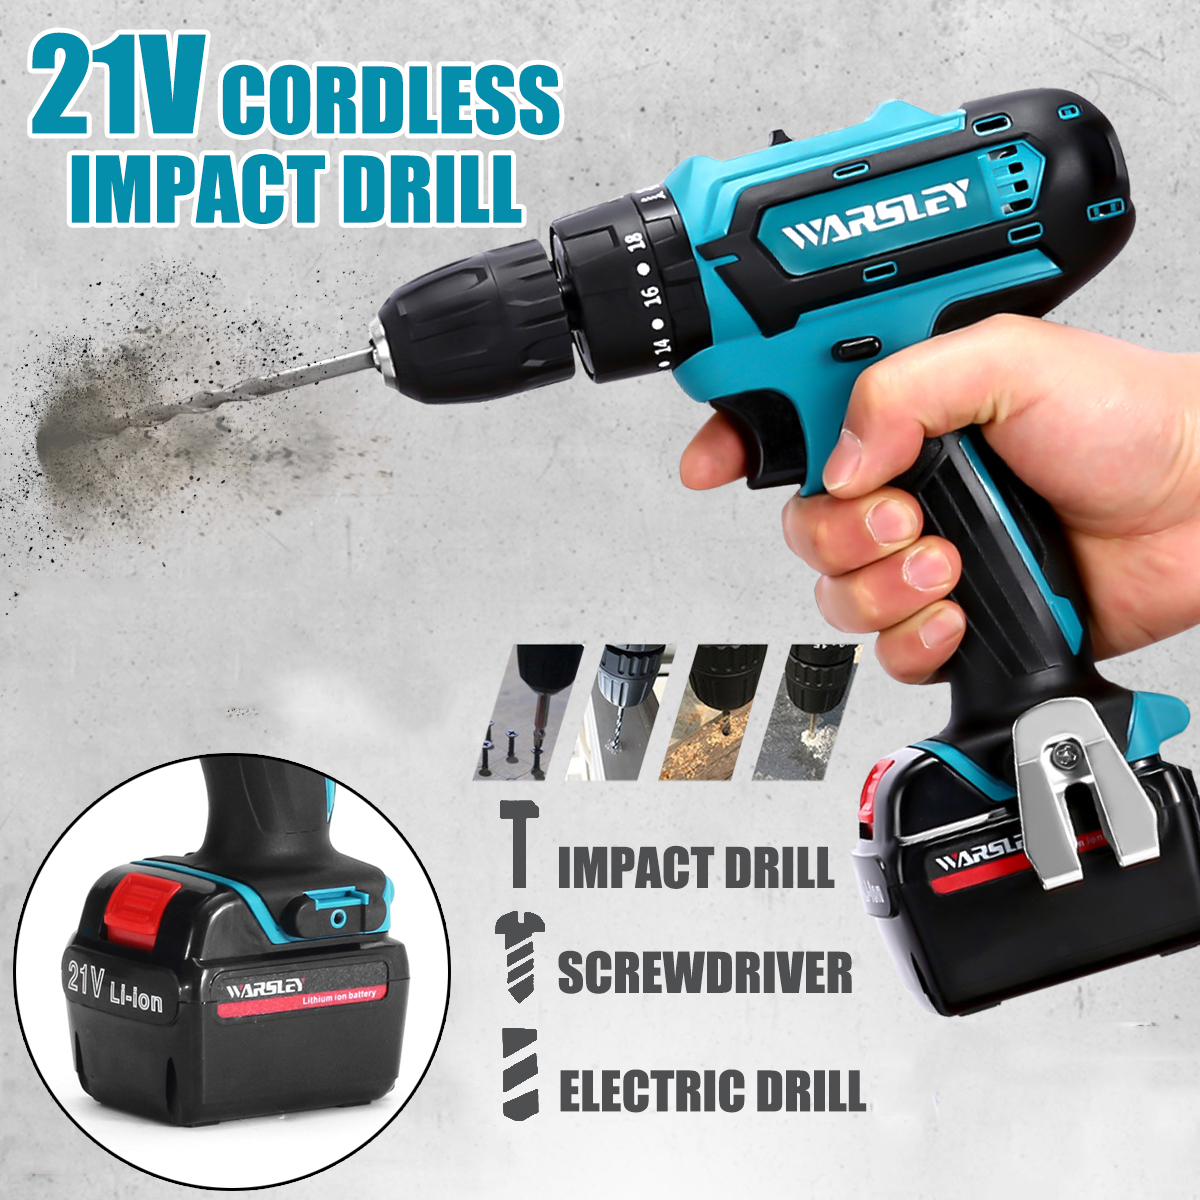 12V-Cordless-Electric-Impact-Drill-Multi-function-Hand-Hammer-Screwdriver-Lithium-Battery-Rechargabl-1452371-1